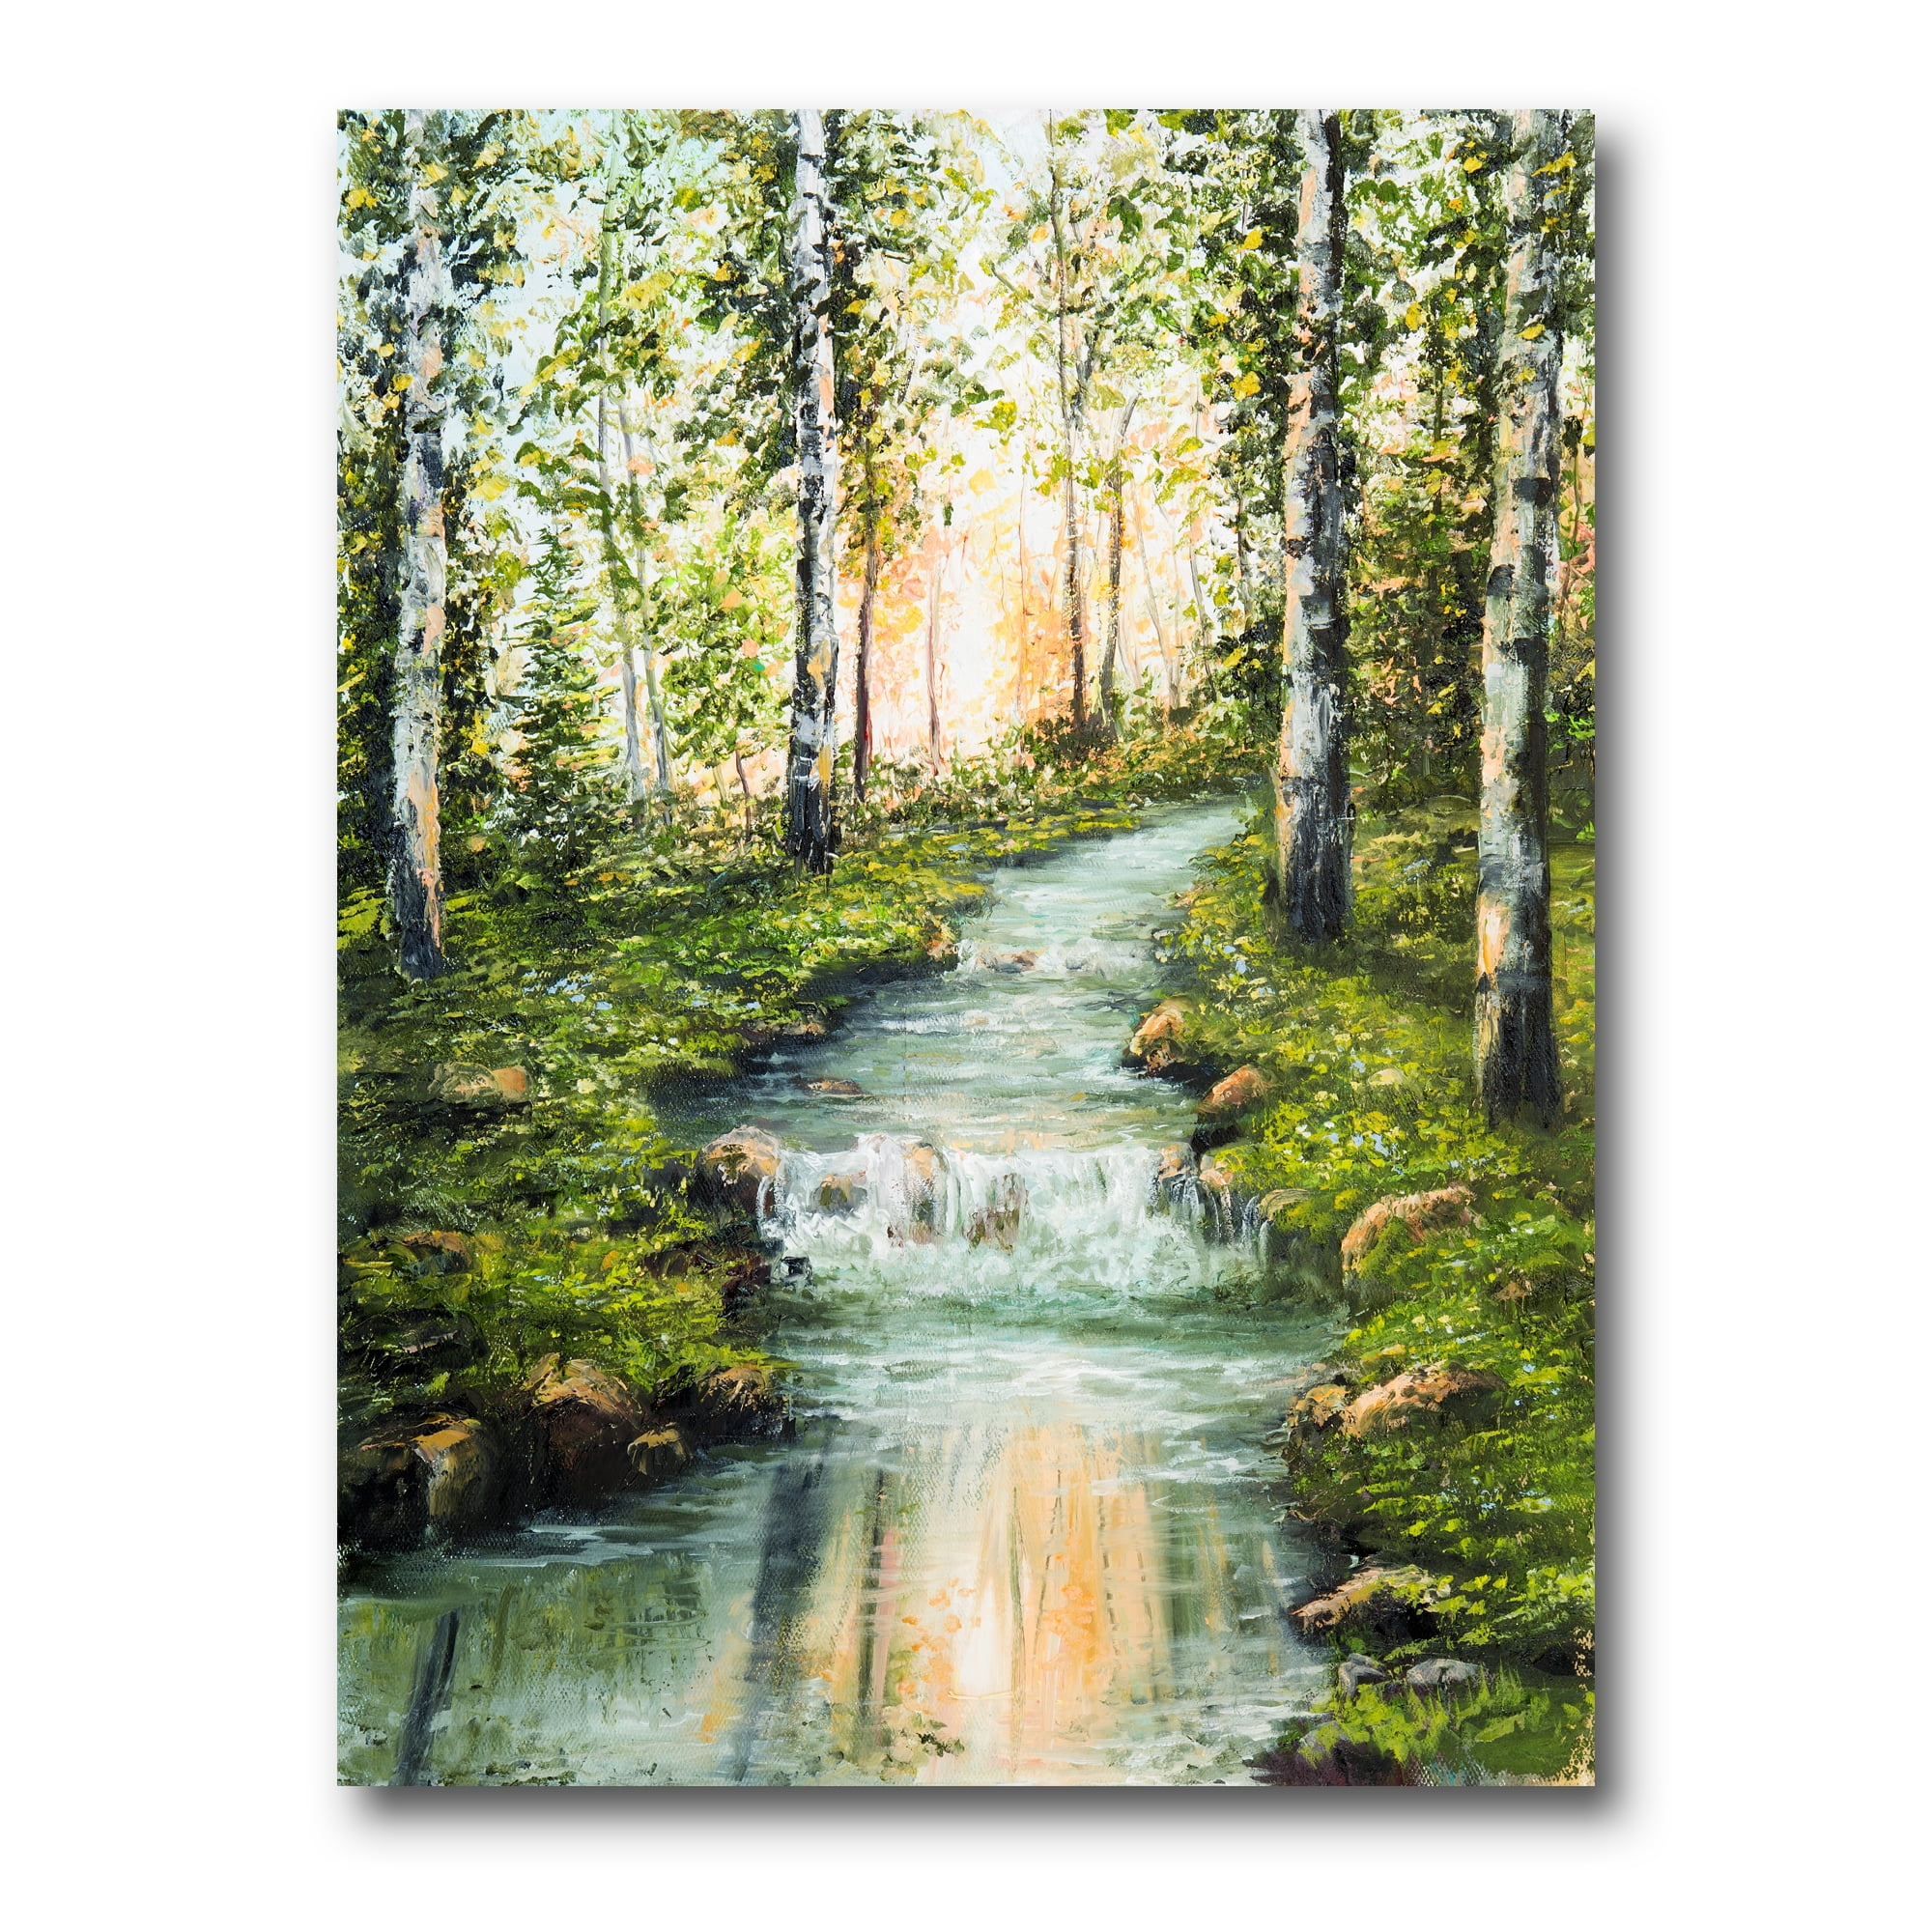  Thomas Kinkade Canvas Painting - Village Prints Pictures  Farmhouse Mountain Lake Nature Wall Art for Living Room Bedroom Decor 16x24  Inch Unframed: Posters & Prints